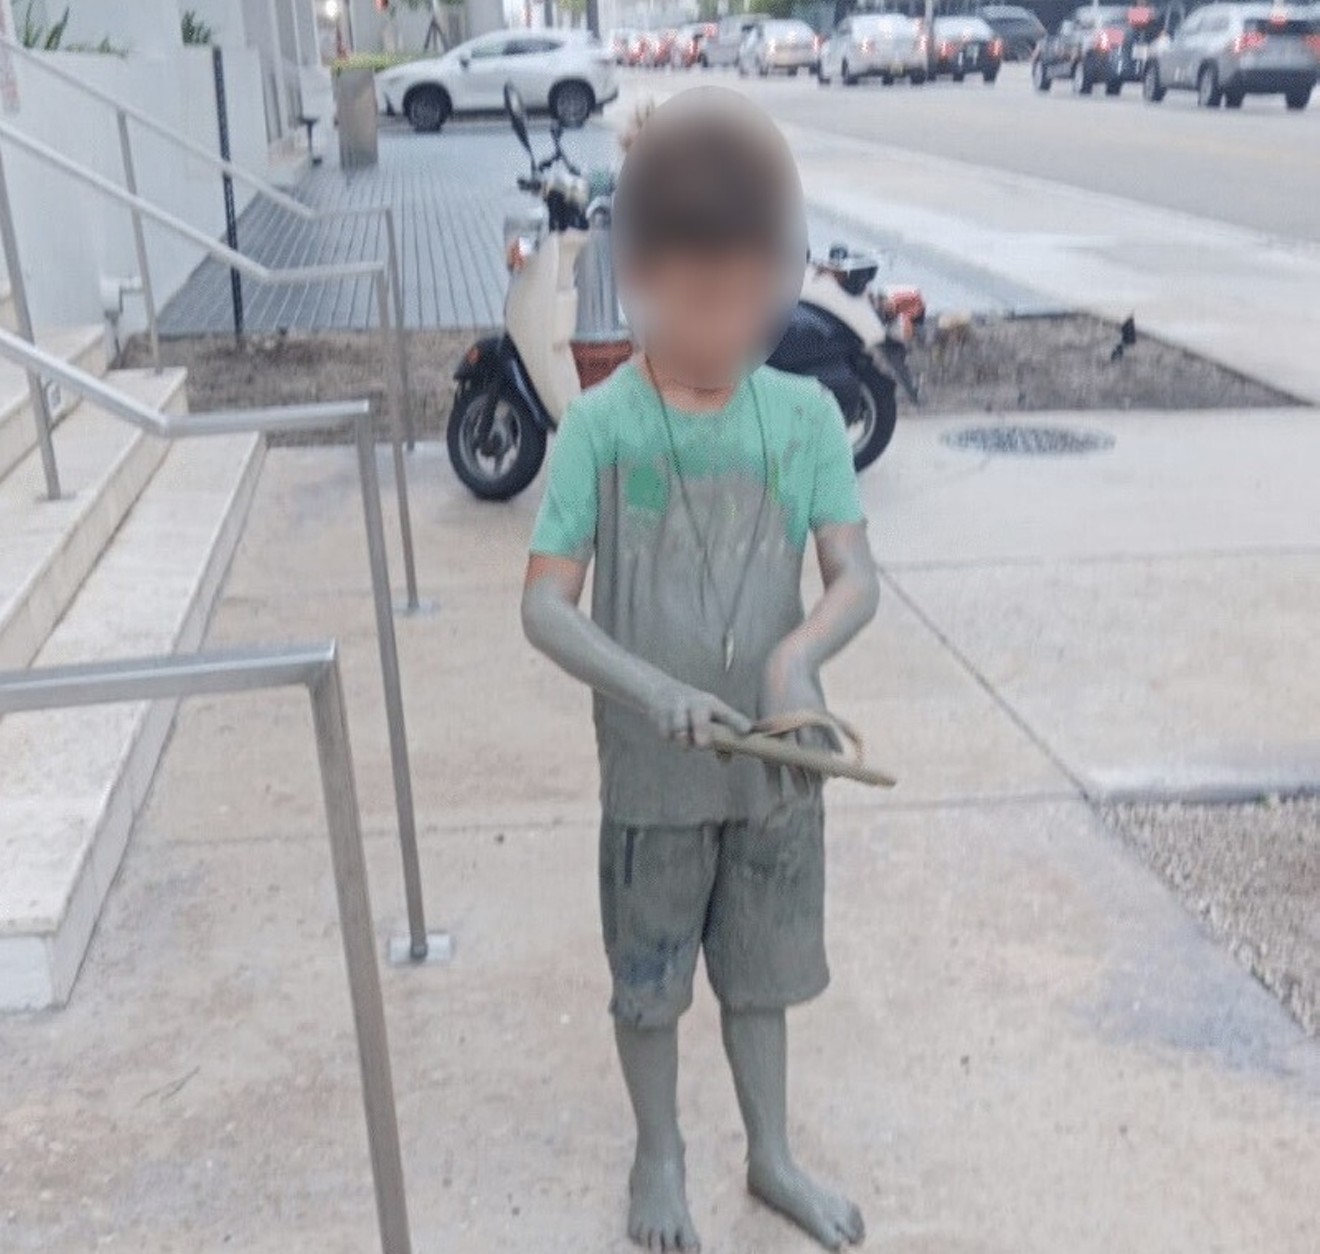 The child emerged covered in cement after falling into the downtown Miami pit.